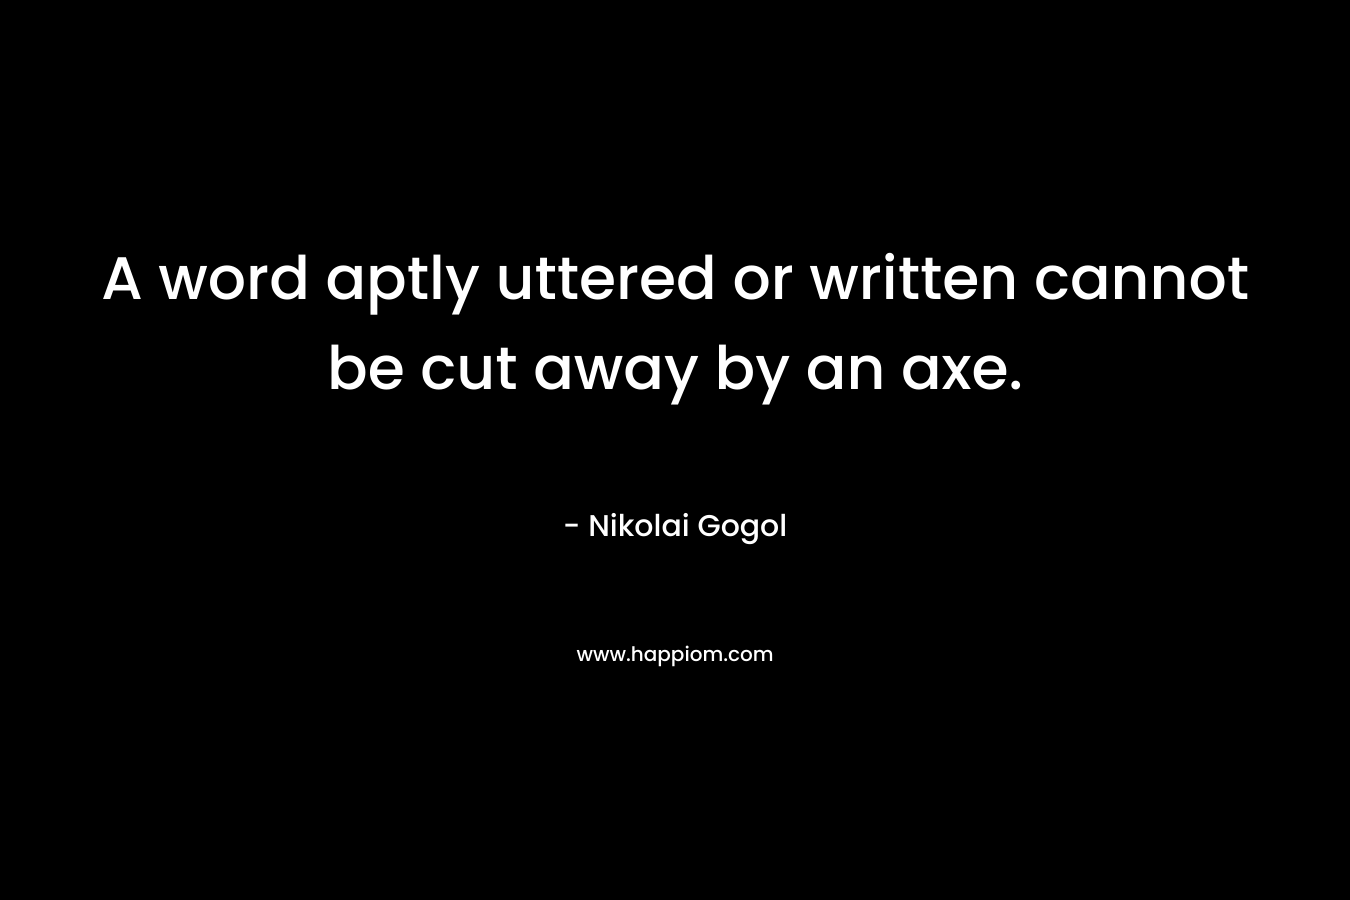 A word aptly uttered or written cannot be cut away by an axe.